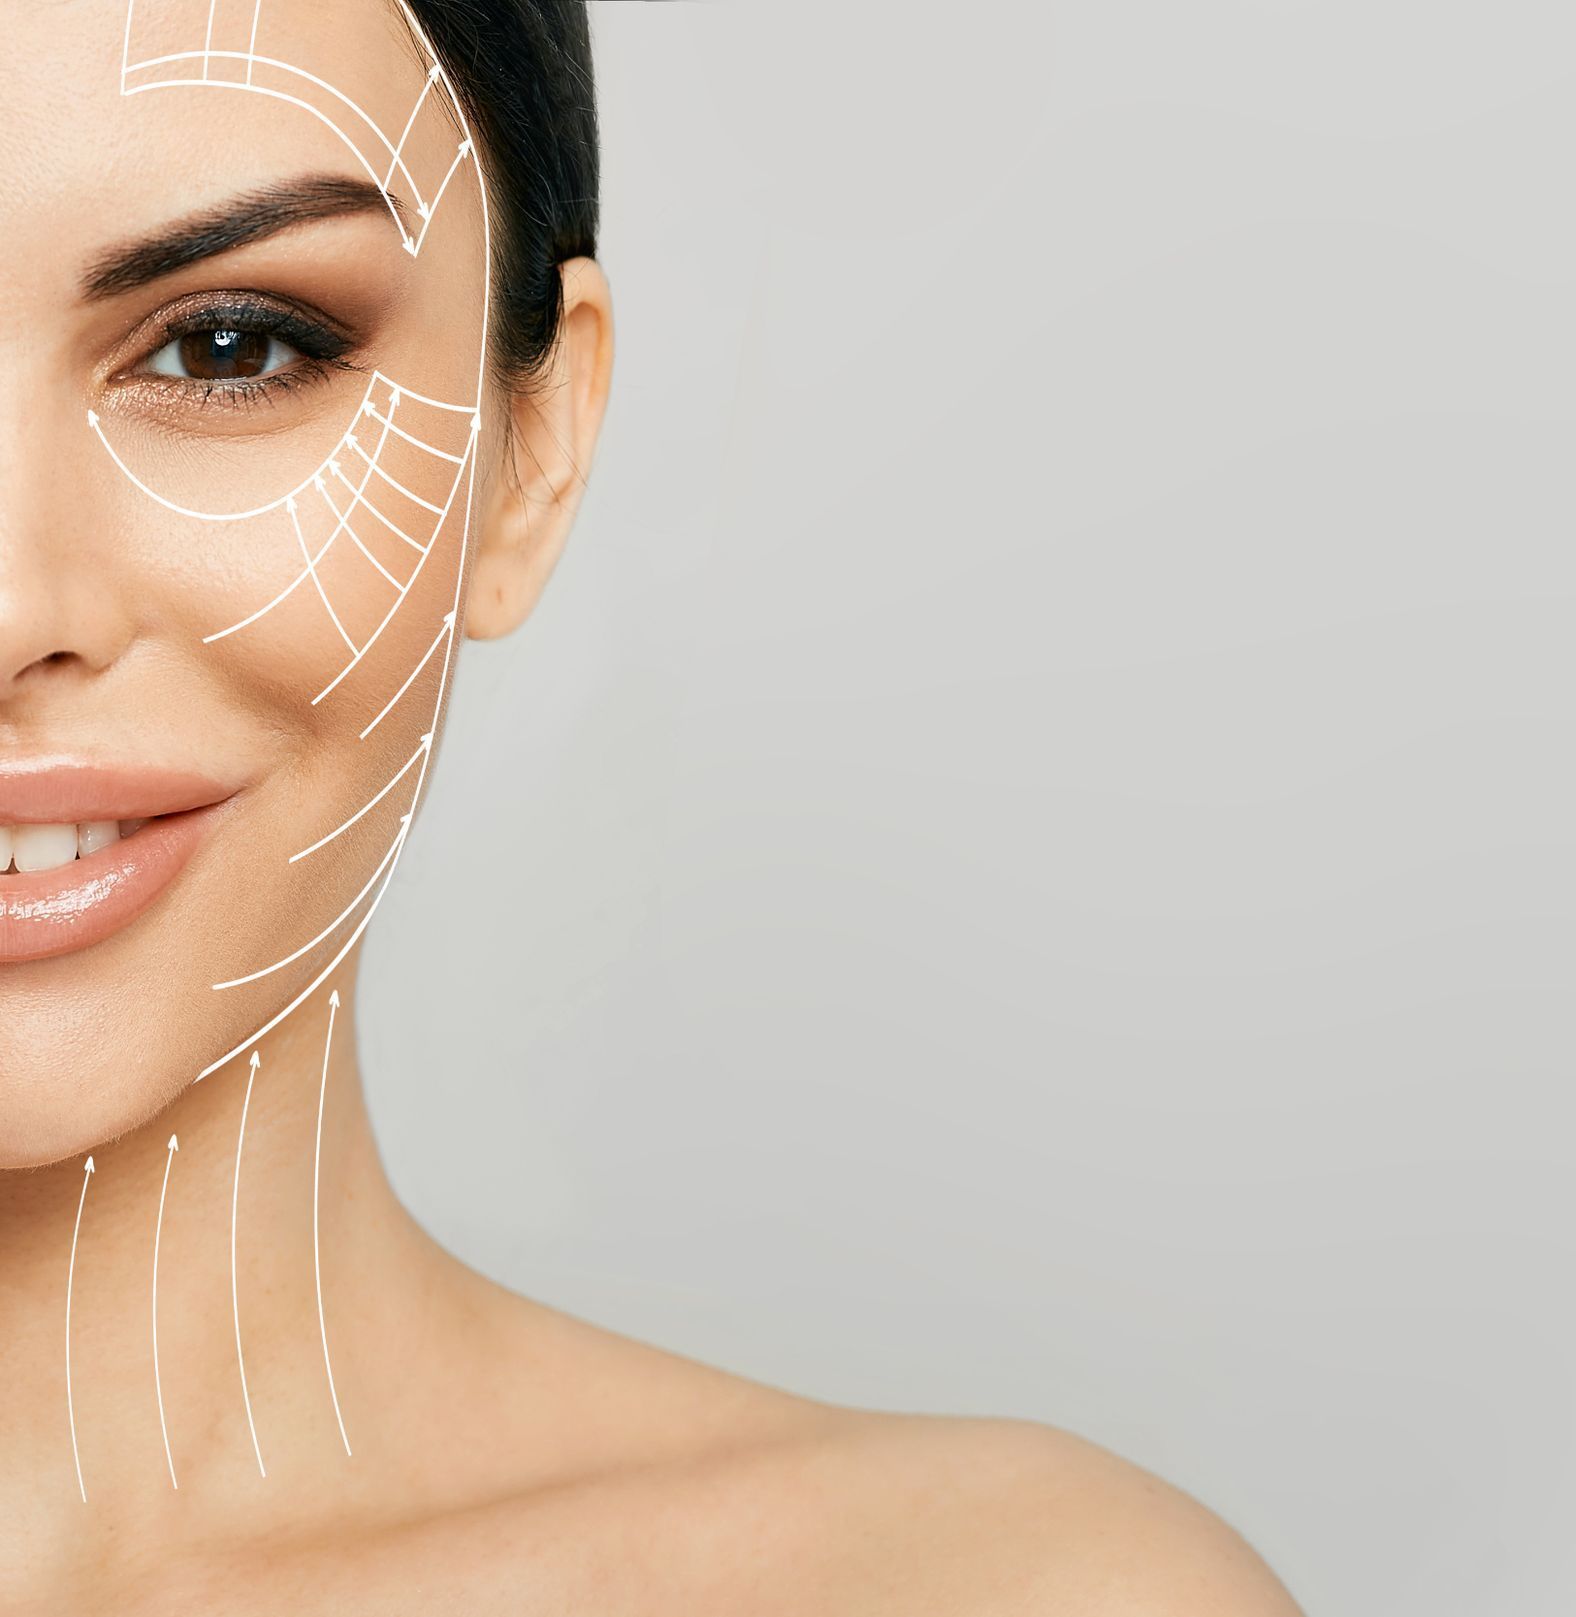 female model with lines over face showing example thread map for threadlift